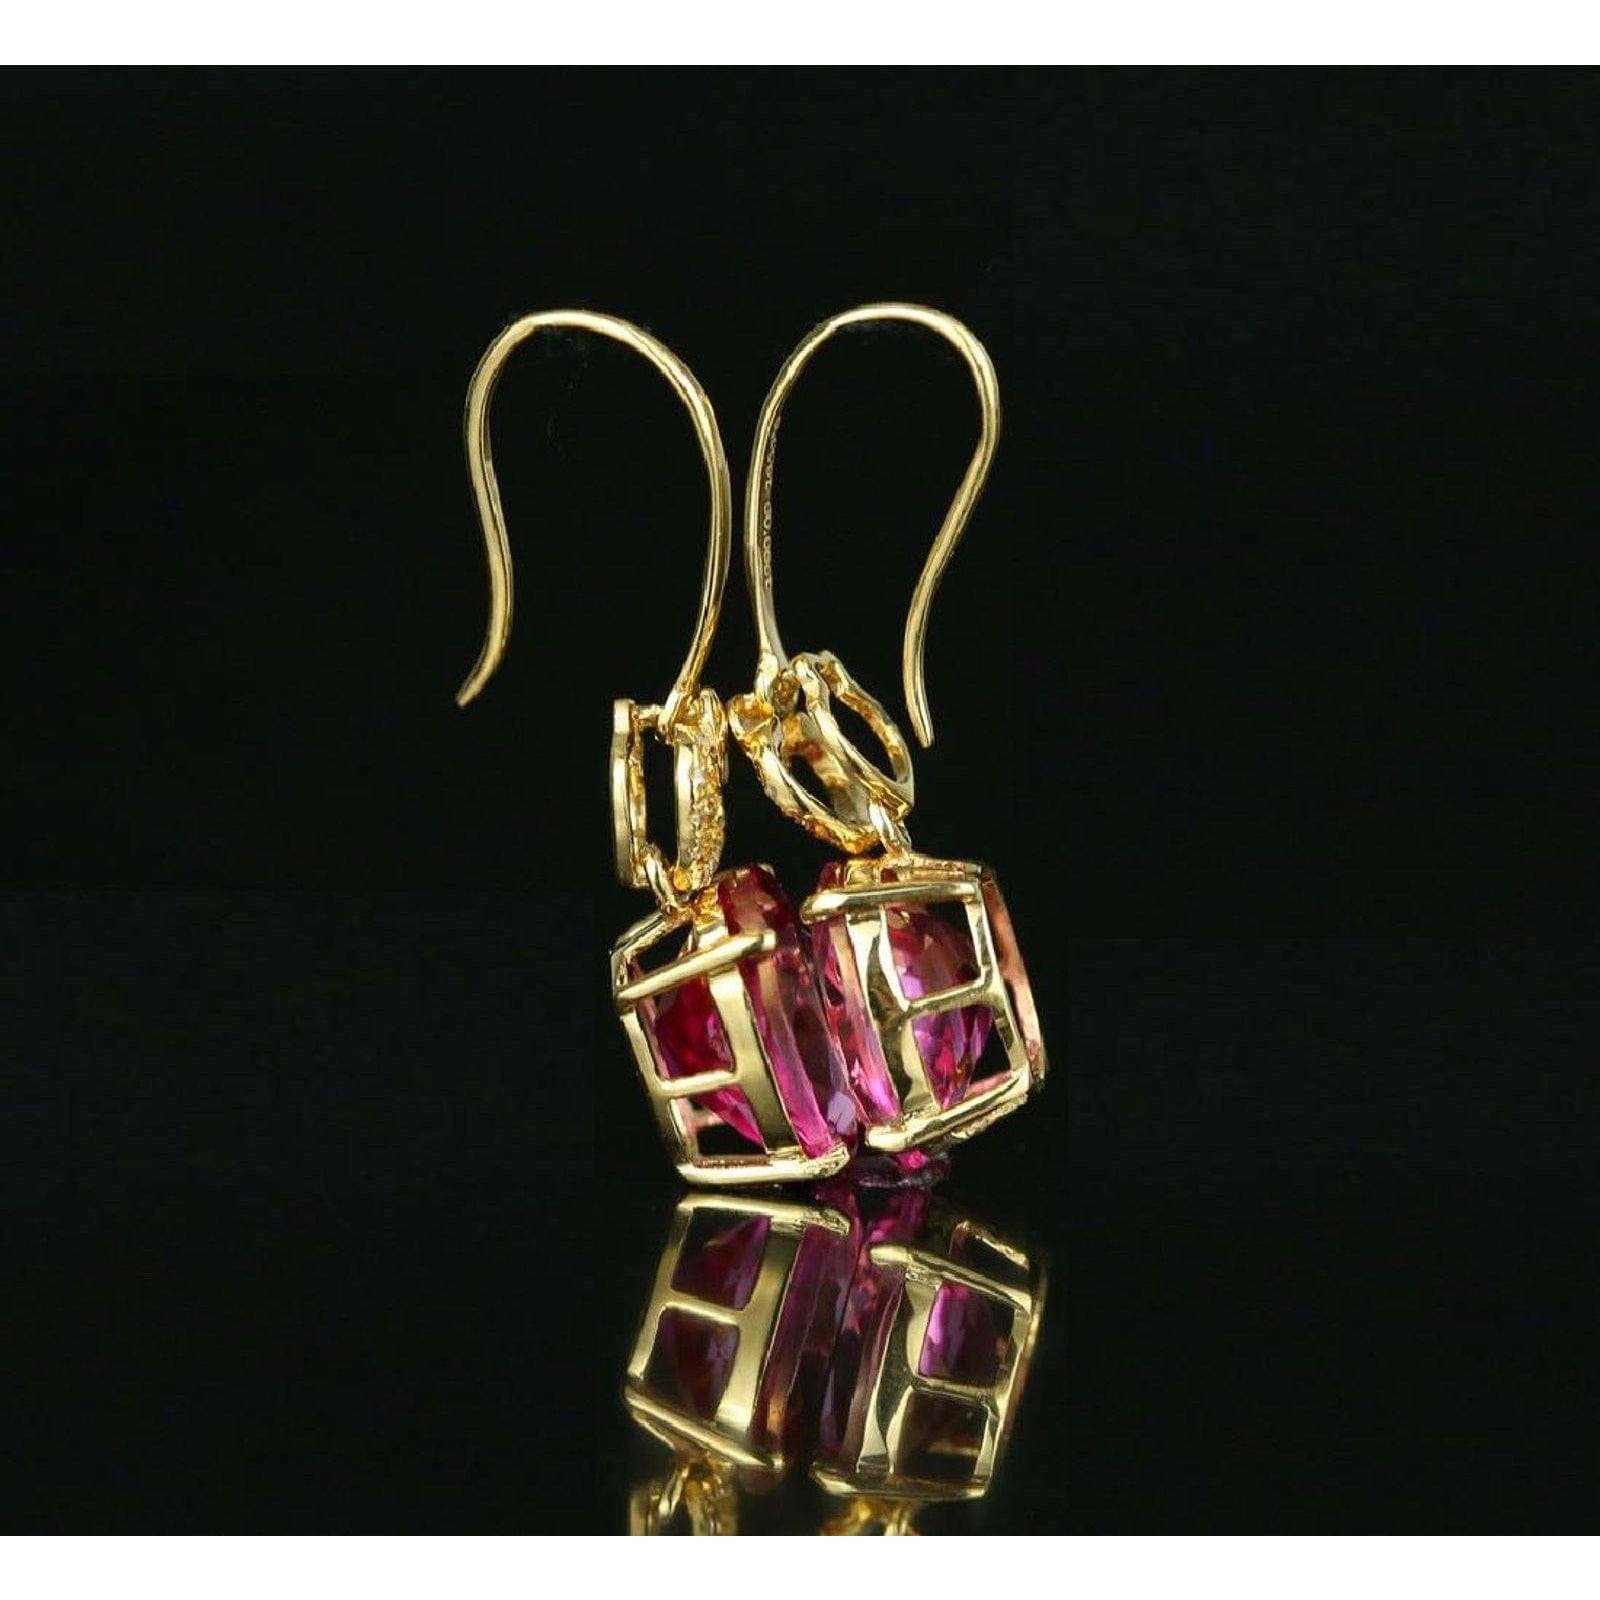 Spectacular 18K Gold Pink Tourmaline and Diamond Earrings, 5.36 ctw - The Pink Pigs, A Compassionate Boutique